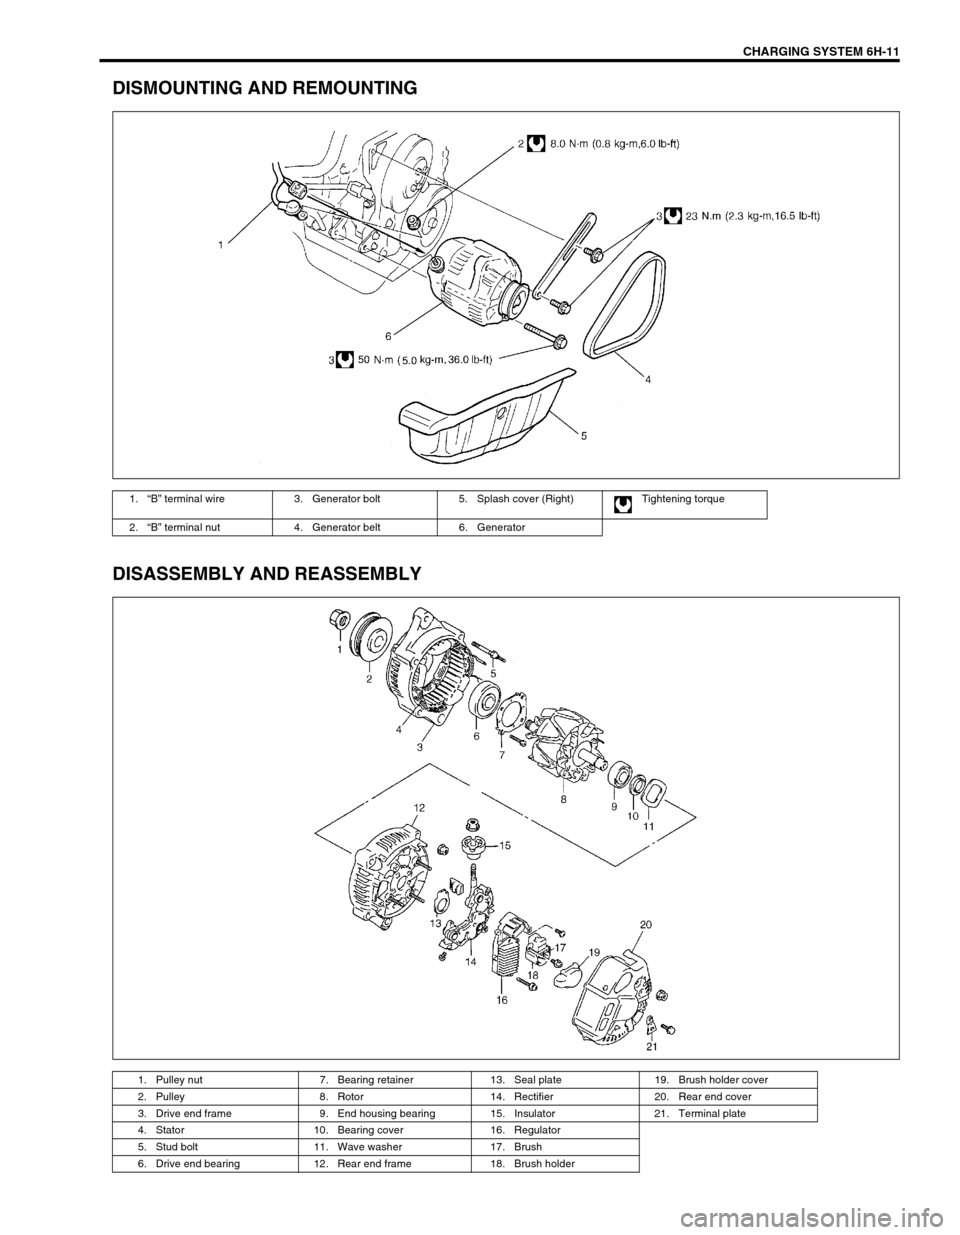 SUZUKI SWIFT 2000 1.G RG413 Service Workshop Manual CHARGING SYSTEM 6H-11
DISMOUNTING AND REMOUNTING
DISASSEMBLY AND REASSEMBLY
1.“B” terminal wire 3. Generator bolt 5. Splash cover (Right) Tightening torque
2.“B” terminal nut 4. Generator belt